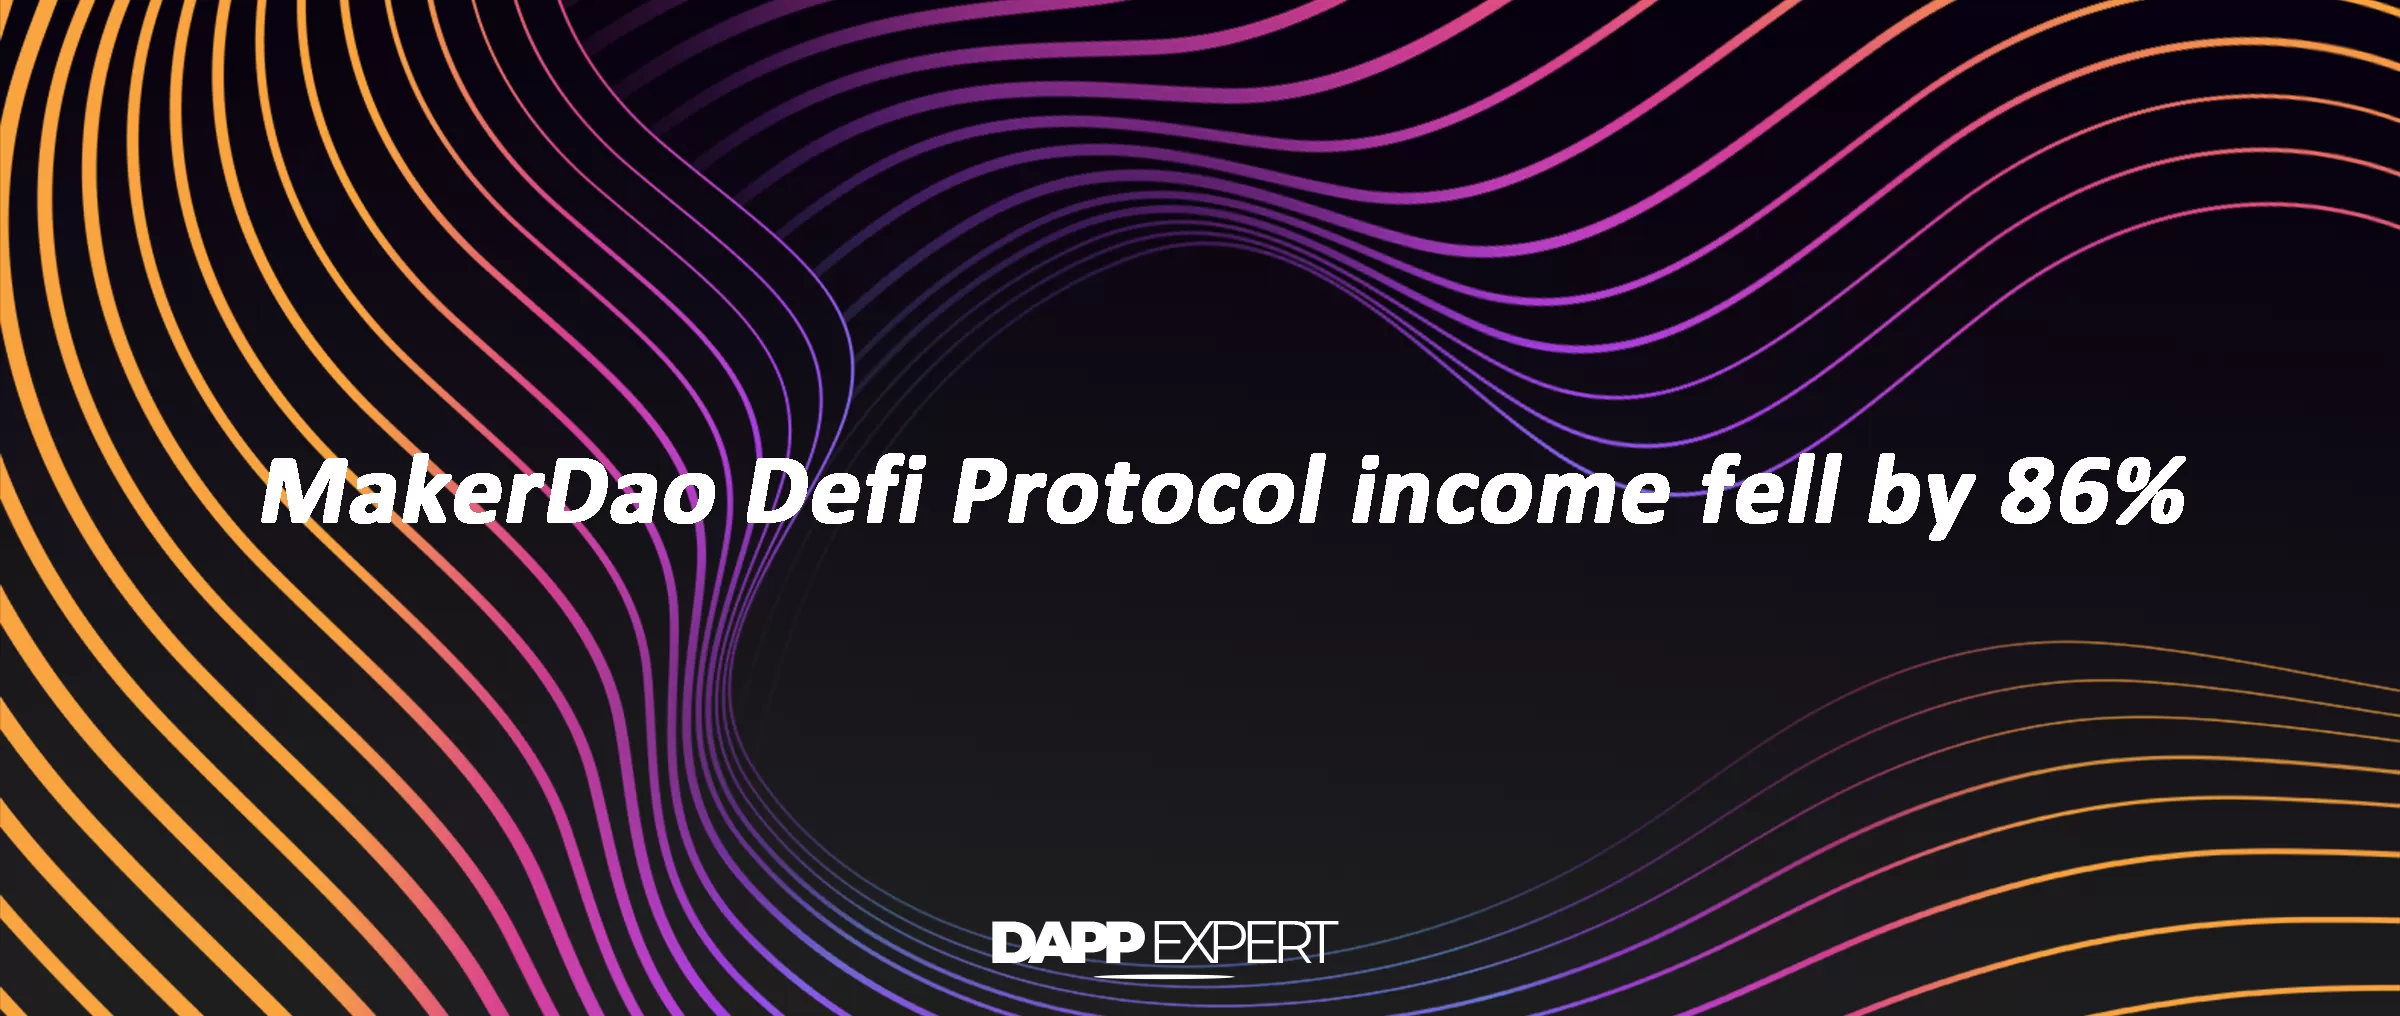 MakerDao Defi Protocol income fell by 86%